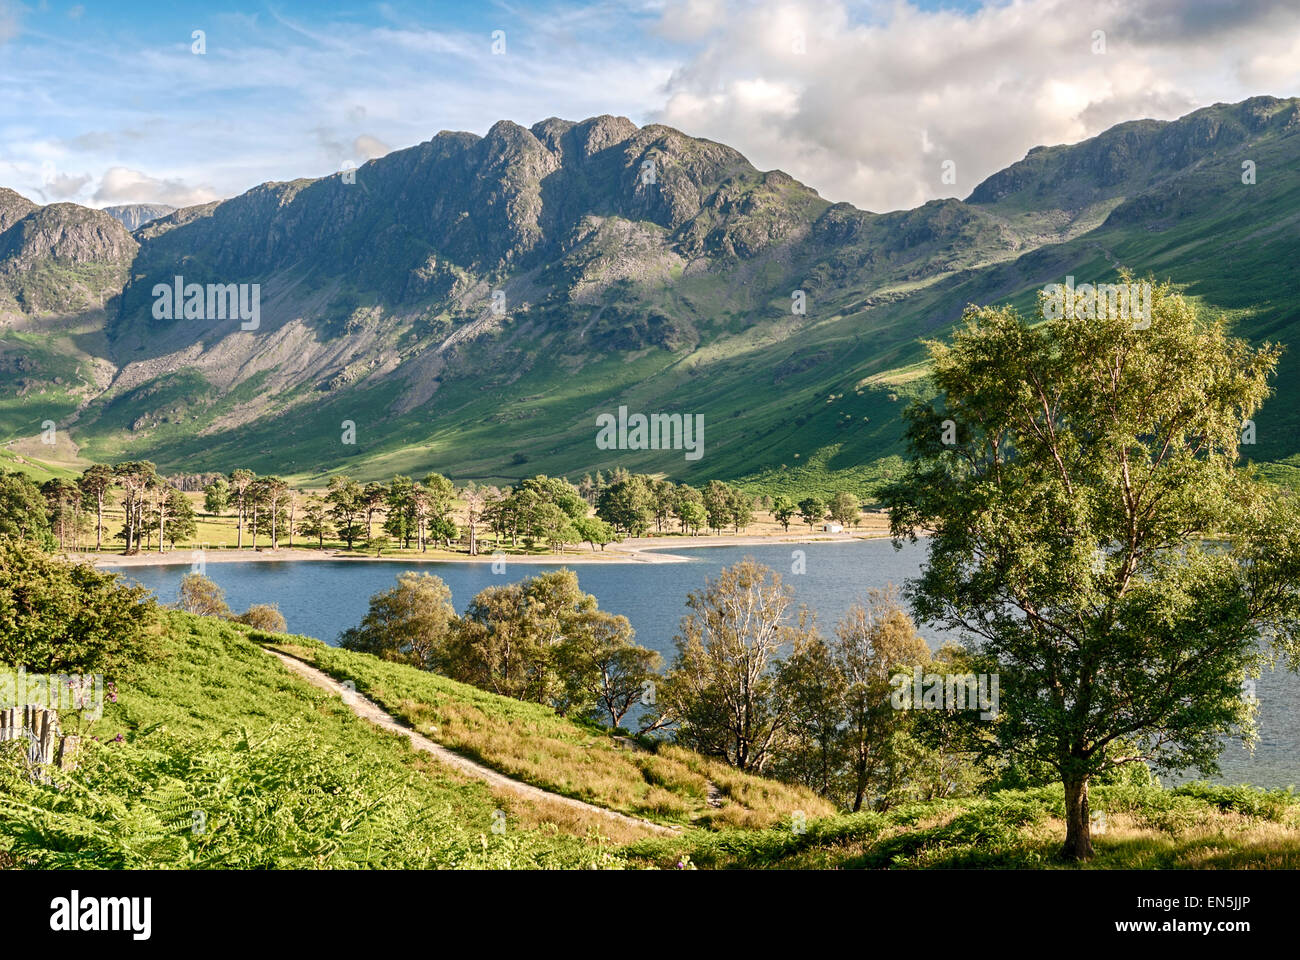 Landscape at Buttermere, a lake in the English Lake District in North West England. Stock Photo